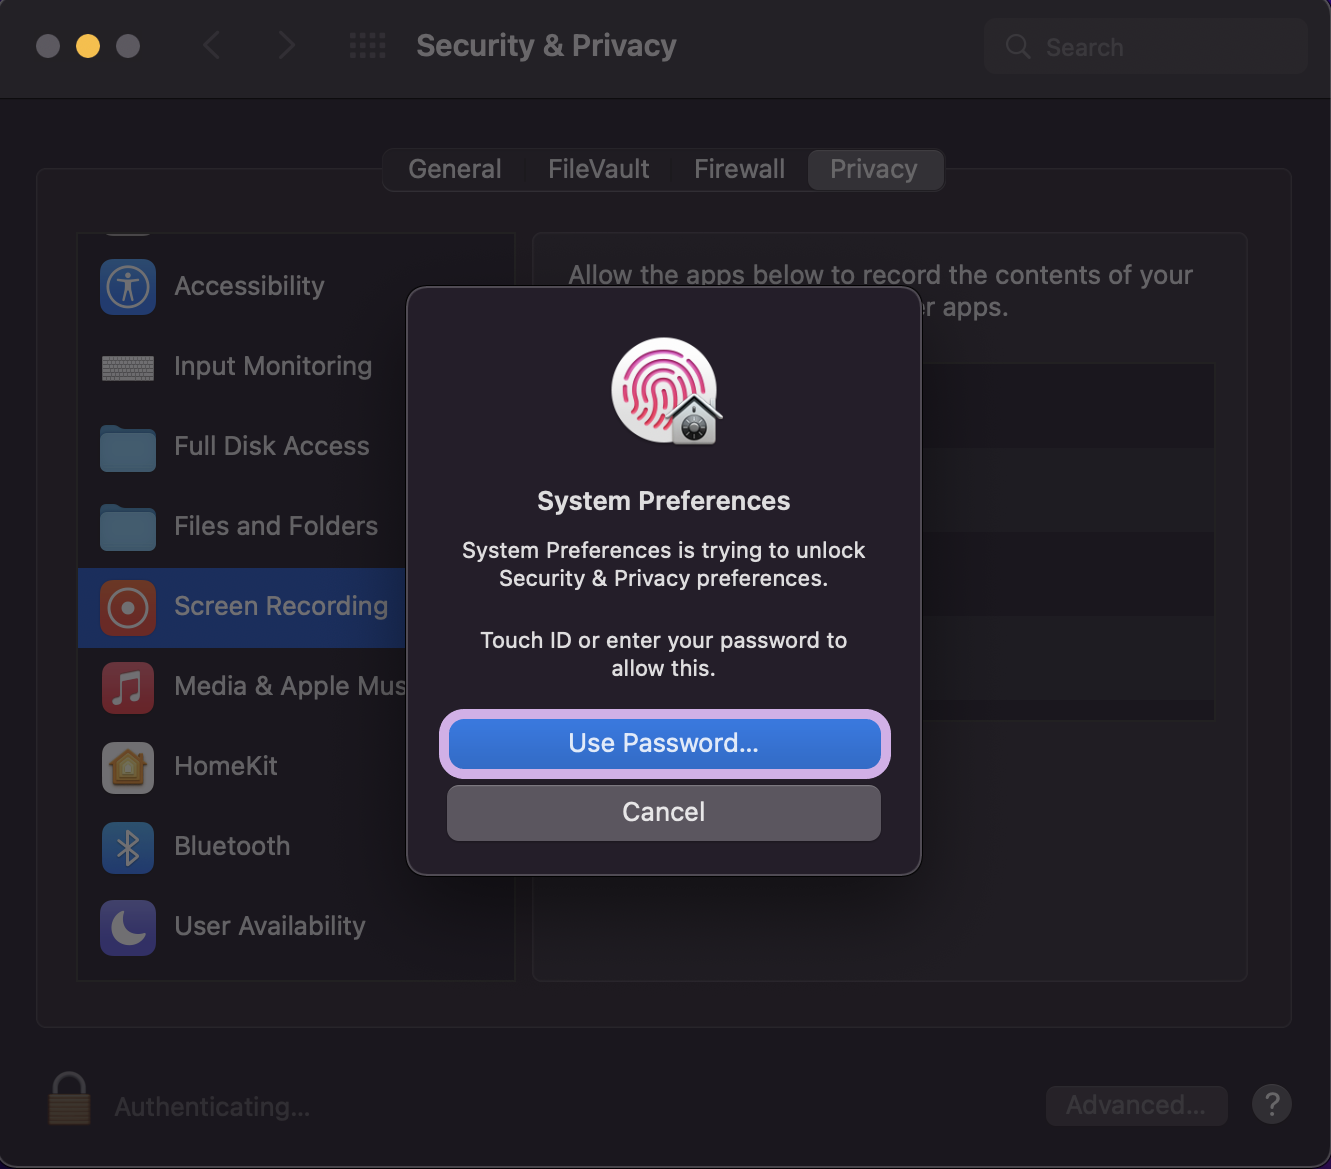 System Preferences security window to access Security & Privacy. Use Password is selected.